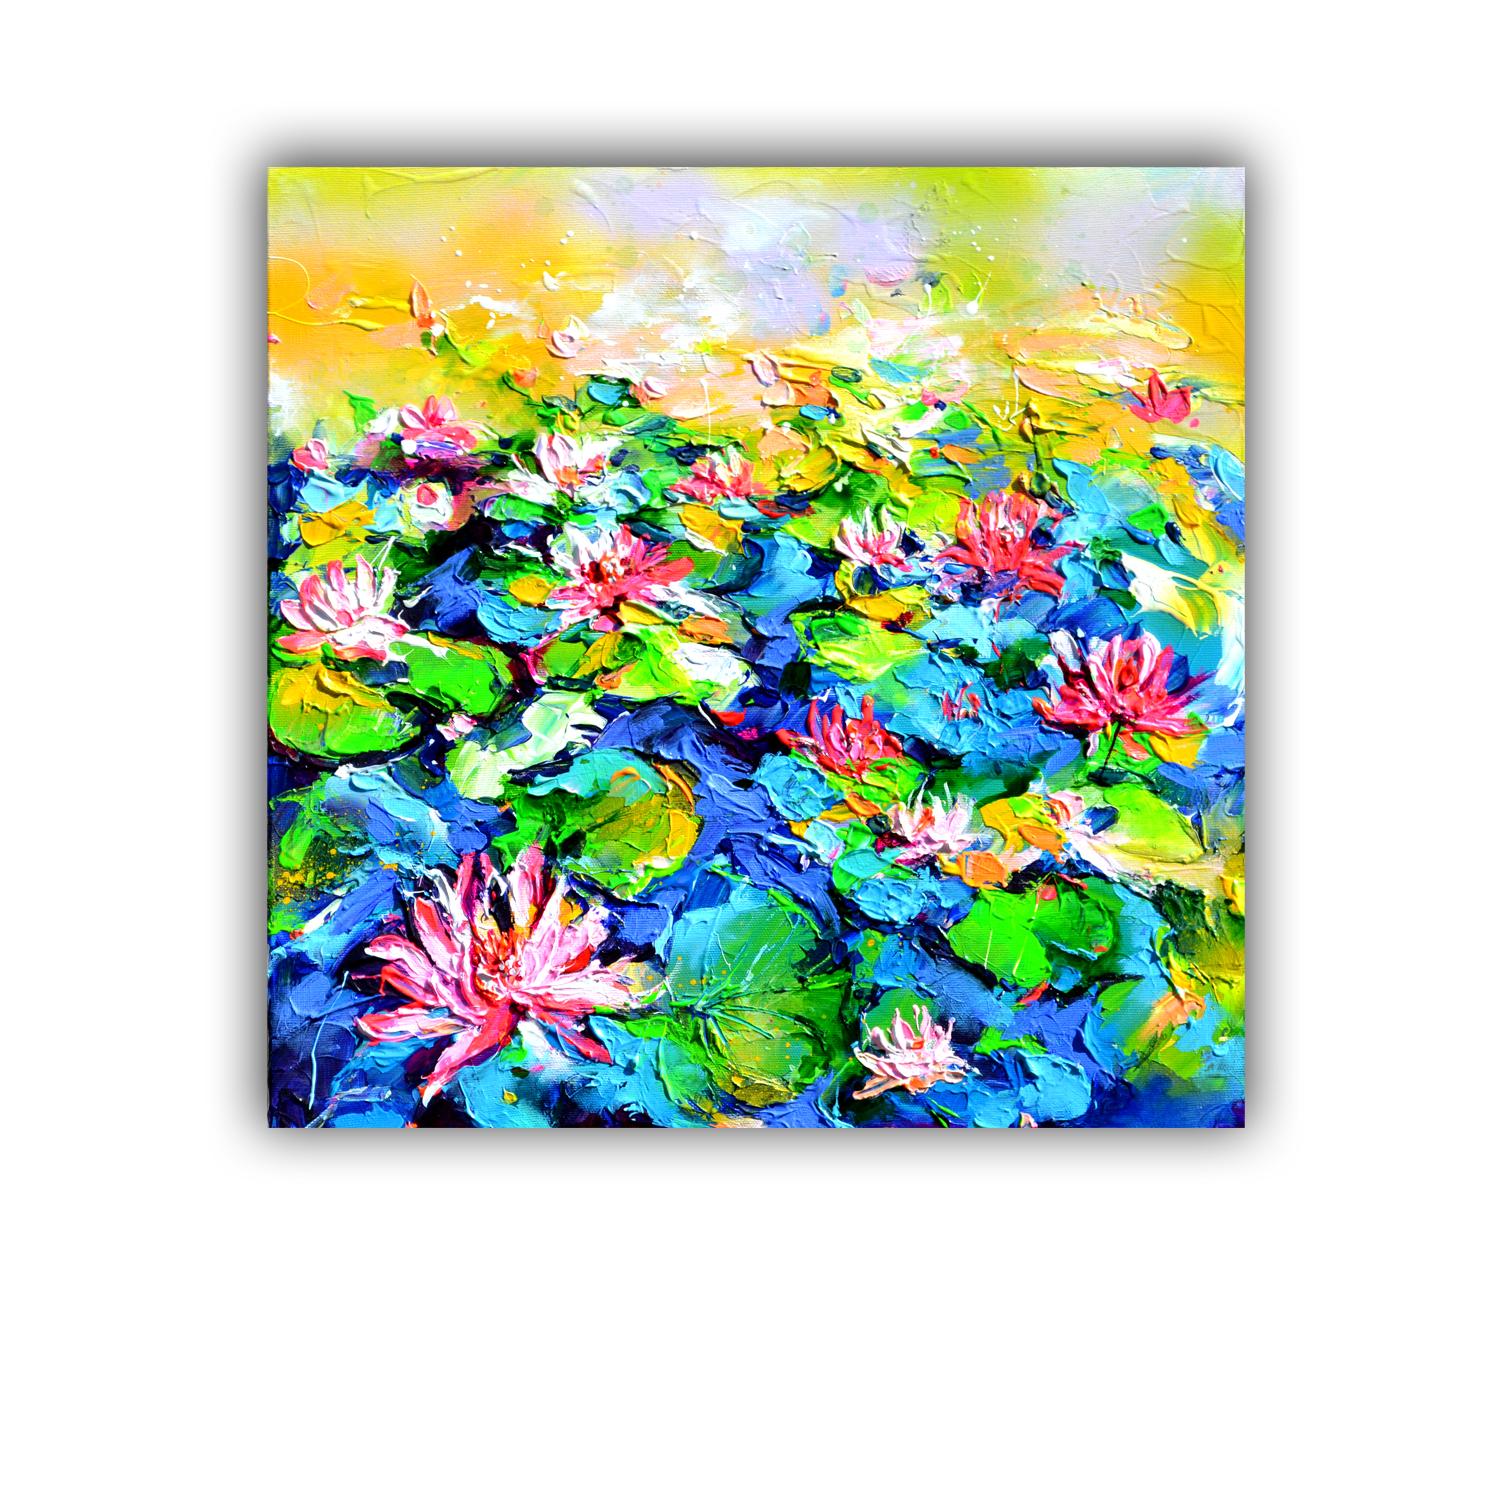 Red Water Lilies on the Pond 2 - Painting by Soos Roxana Gabriela